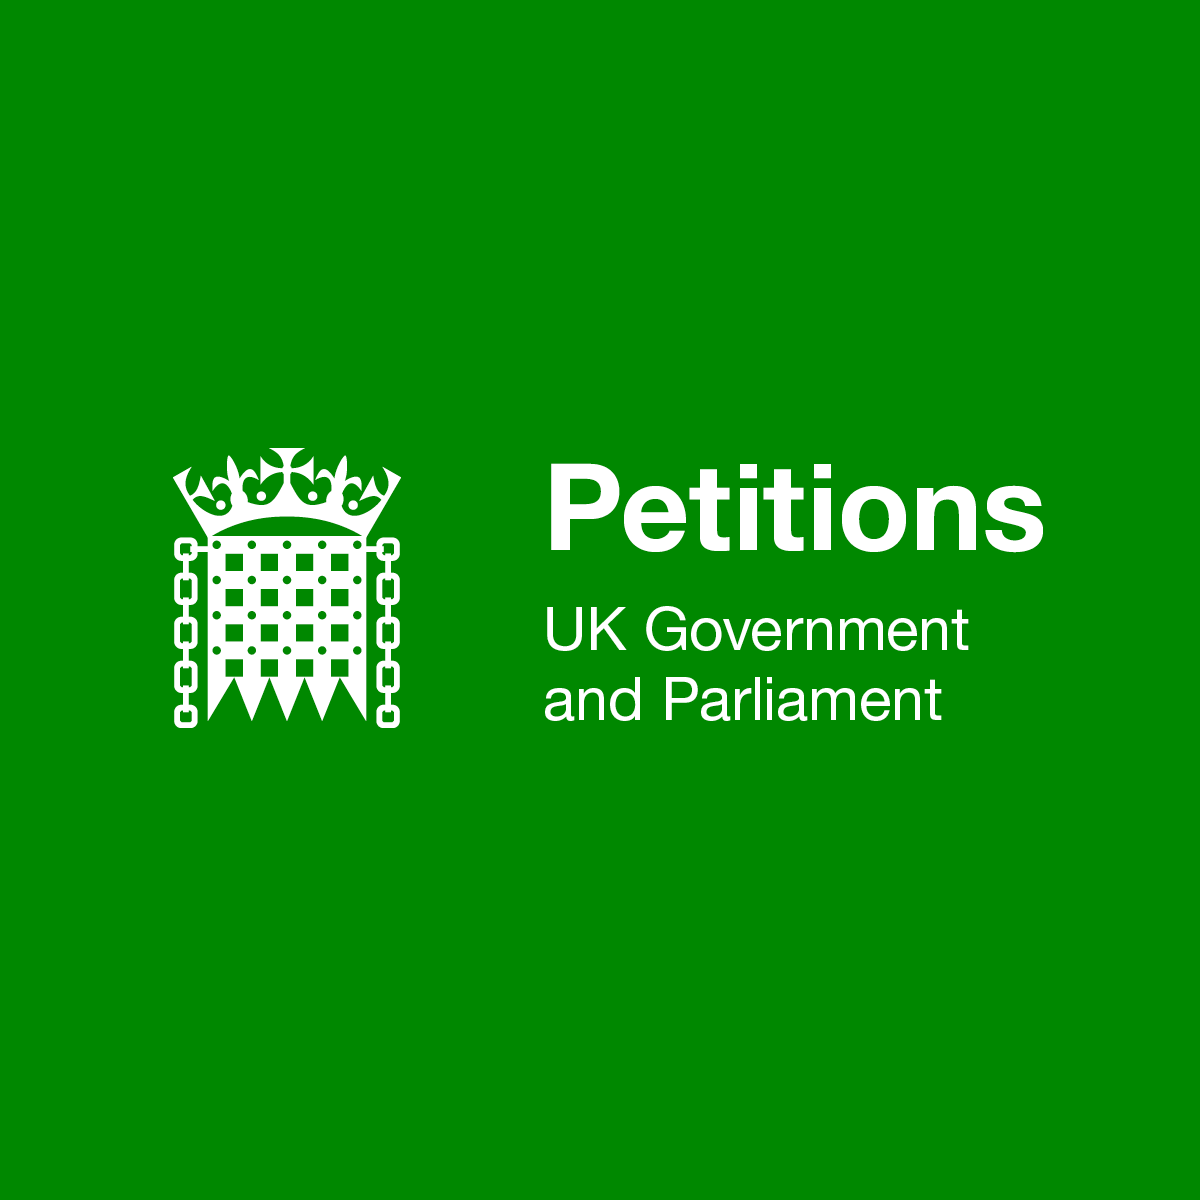 Hold a referendum to scrap the UK's policy of Net Zero CO2 by 2050 - Petitions